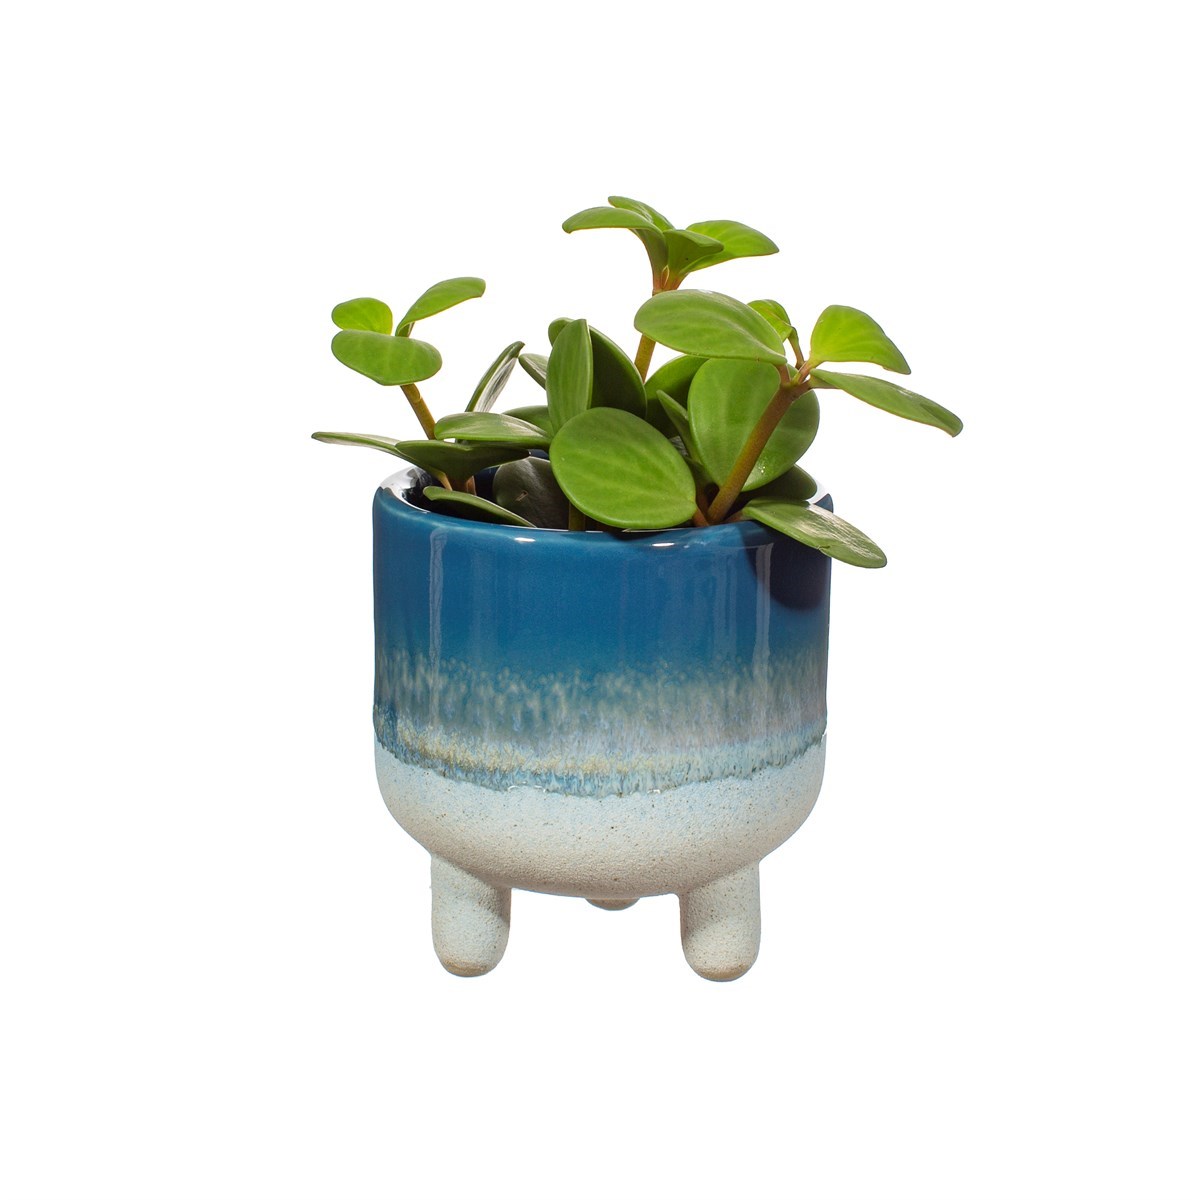 Sass and Belle- Mojave Blue Planter